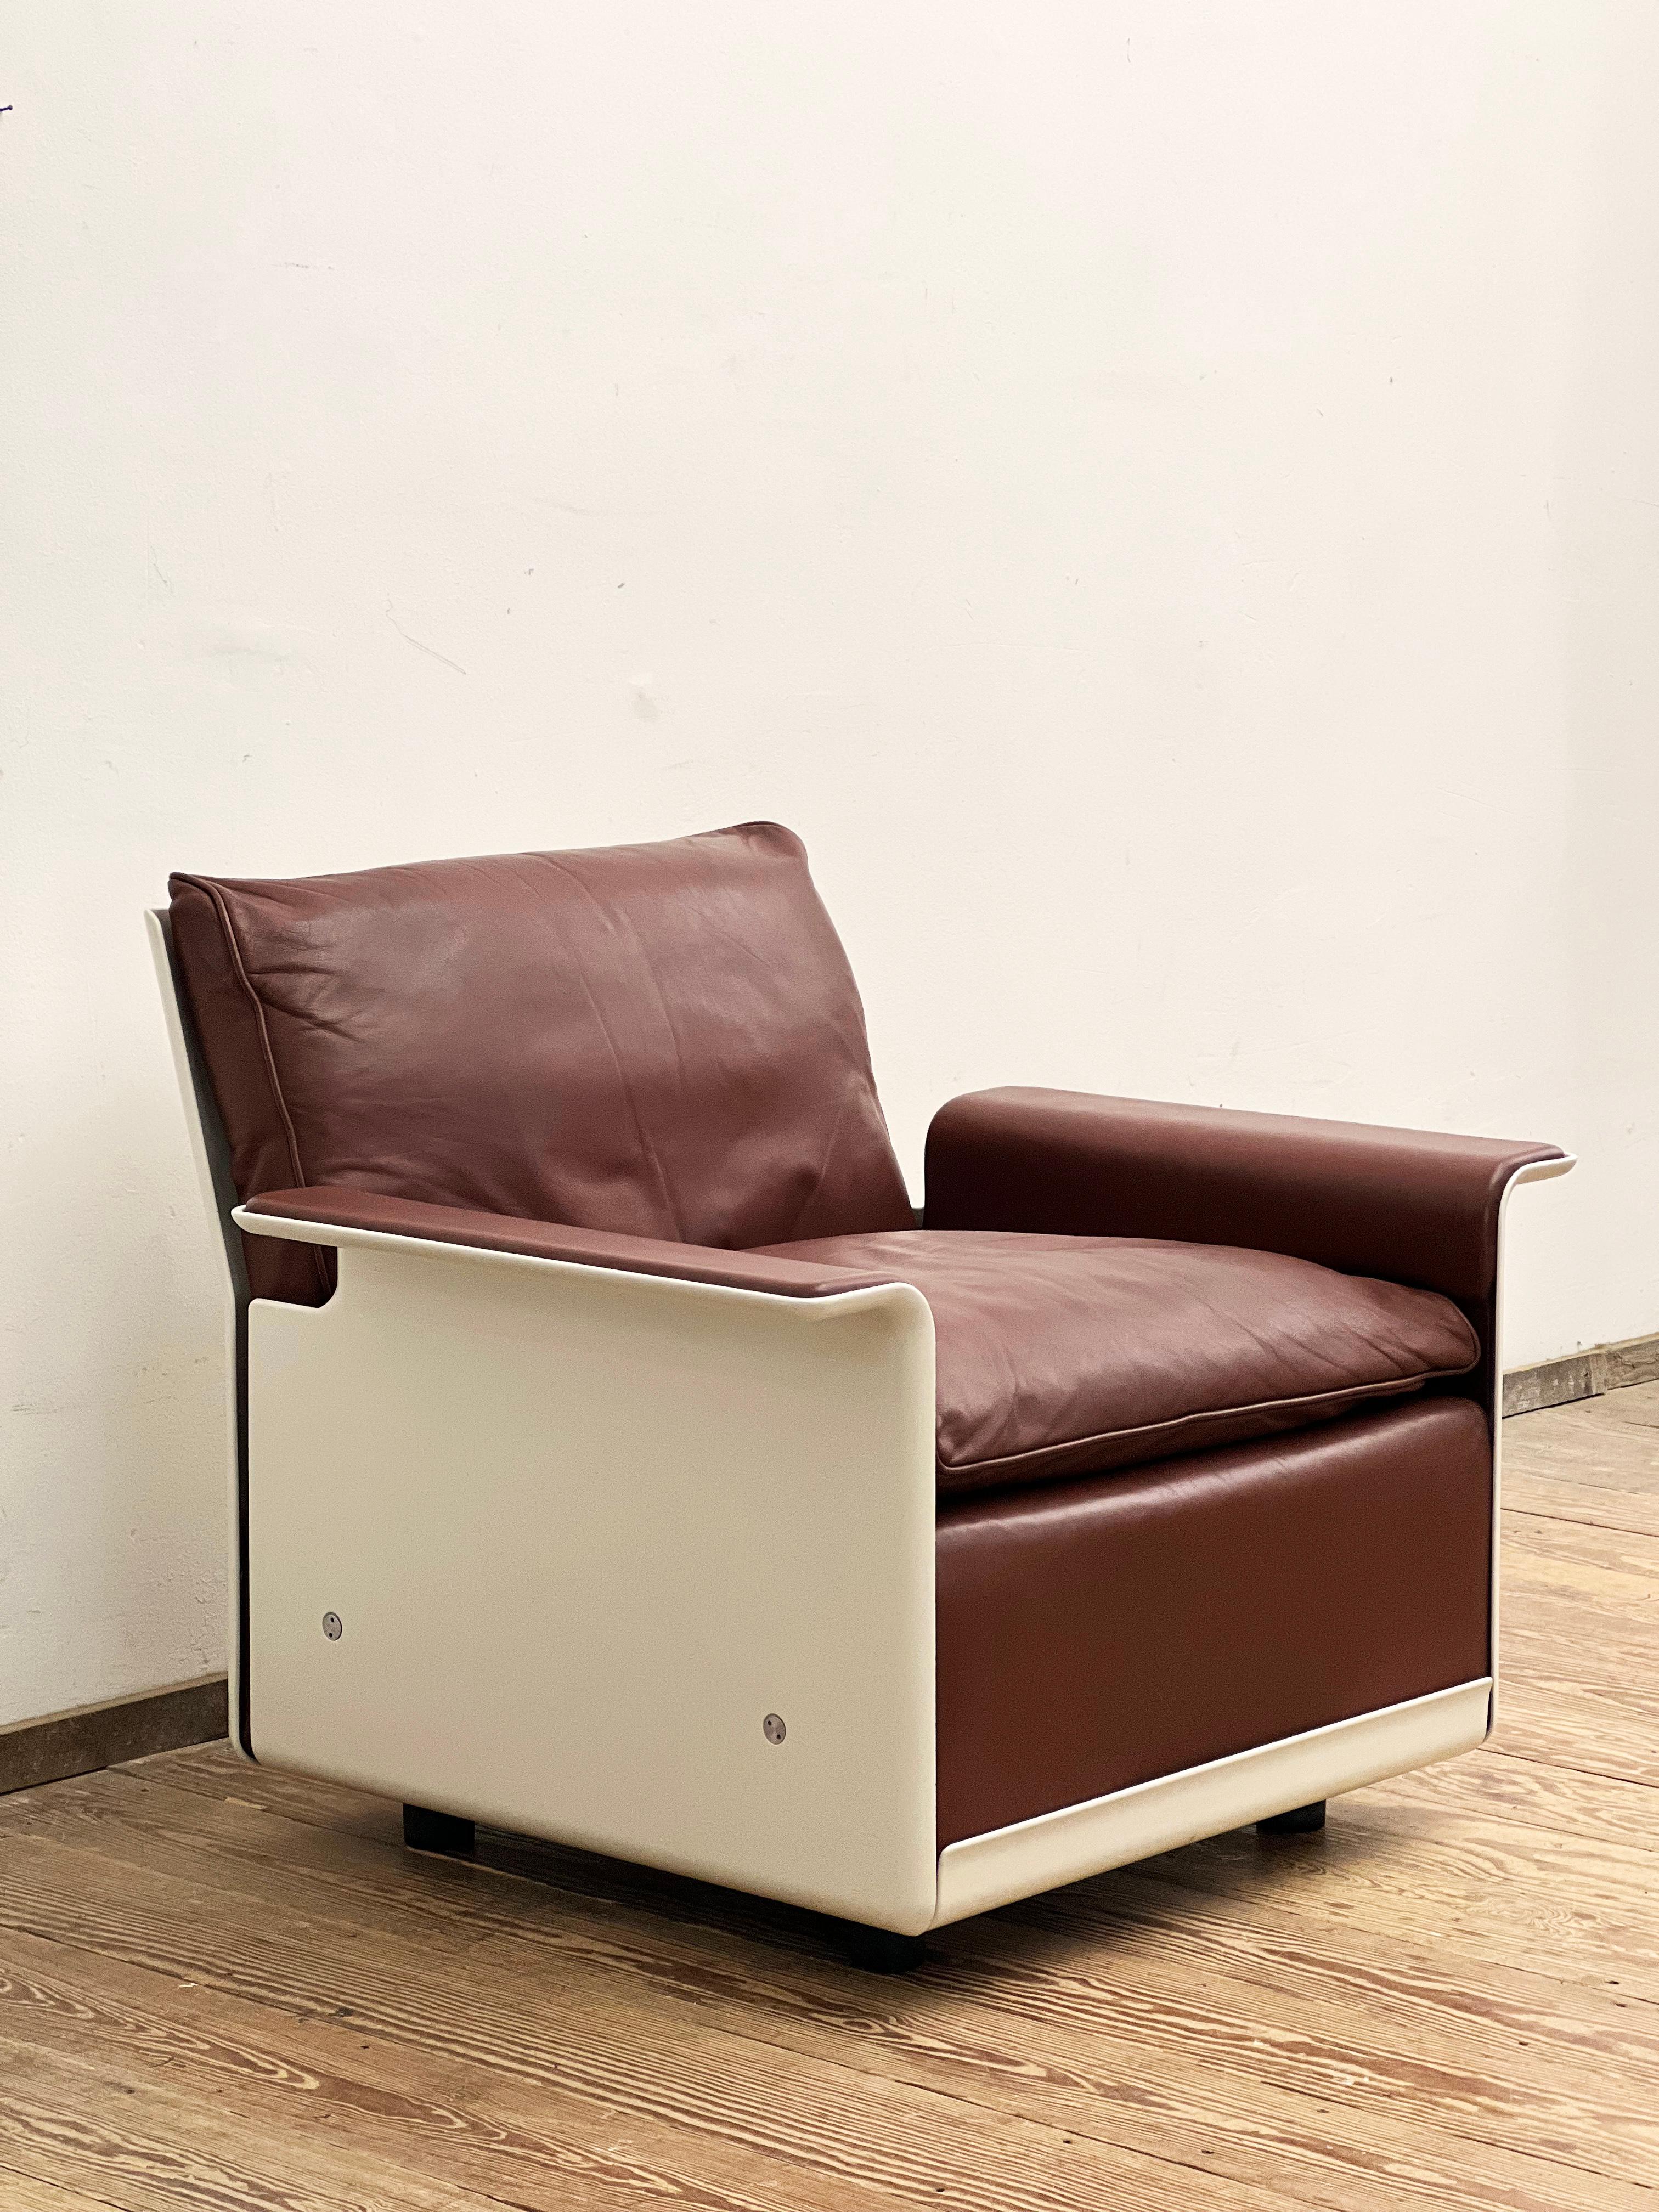 Mid-Century Lounge or Armchair by Dieter Rams for Vitsoe, German Design, 1960s For Sale 2